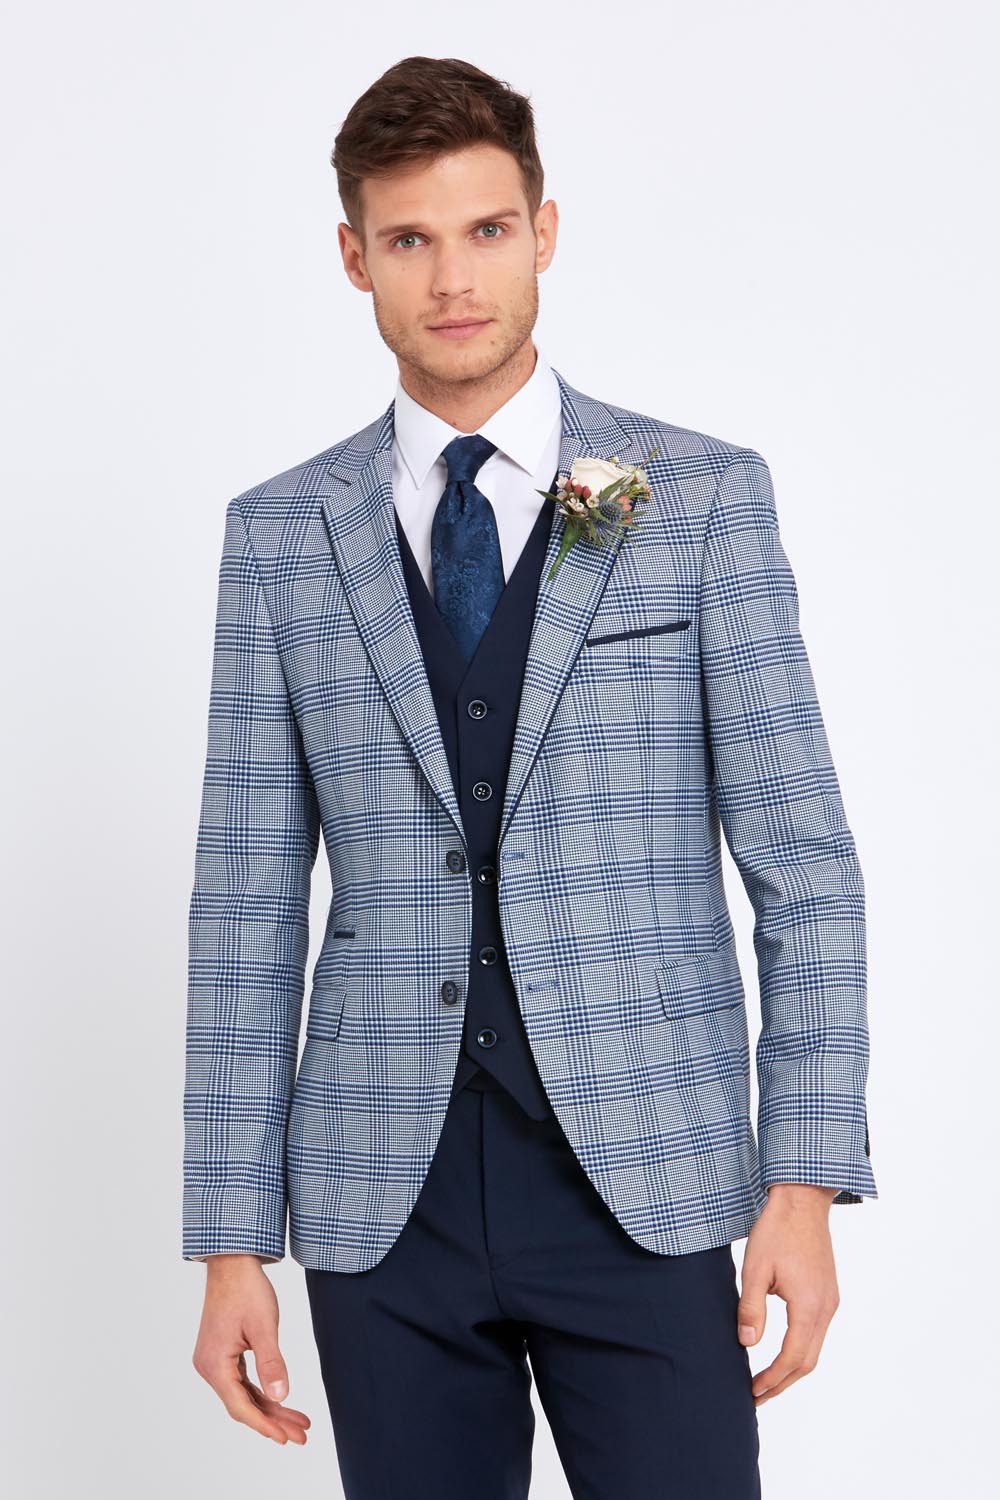 Vardy Pale Blue Check 3 Piece Suit Tom Murphy's Formal